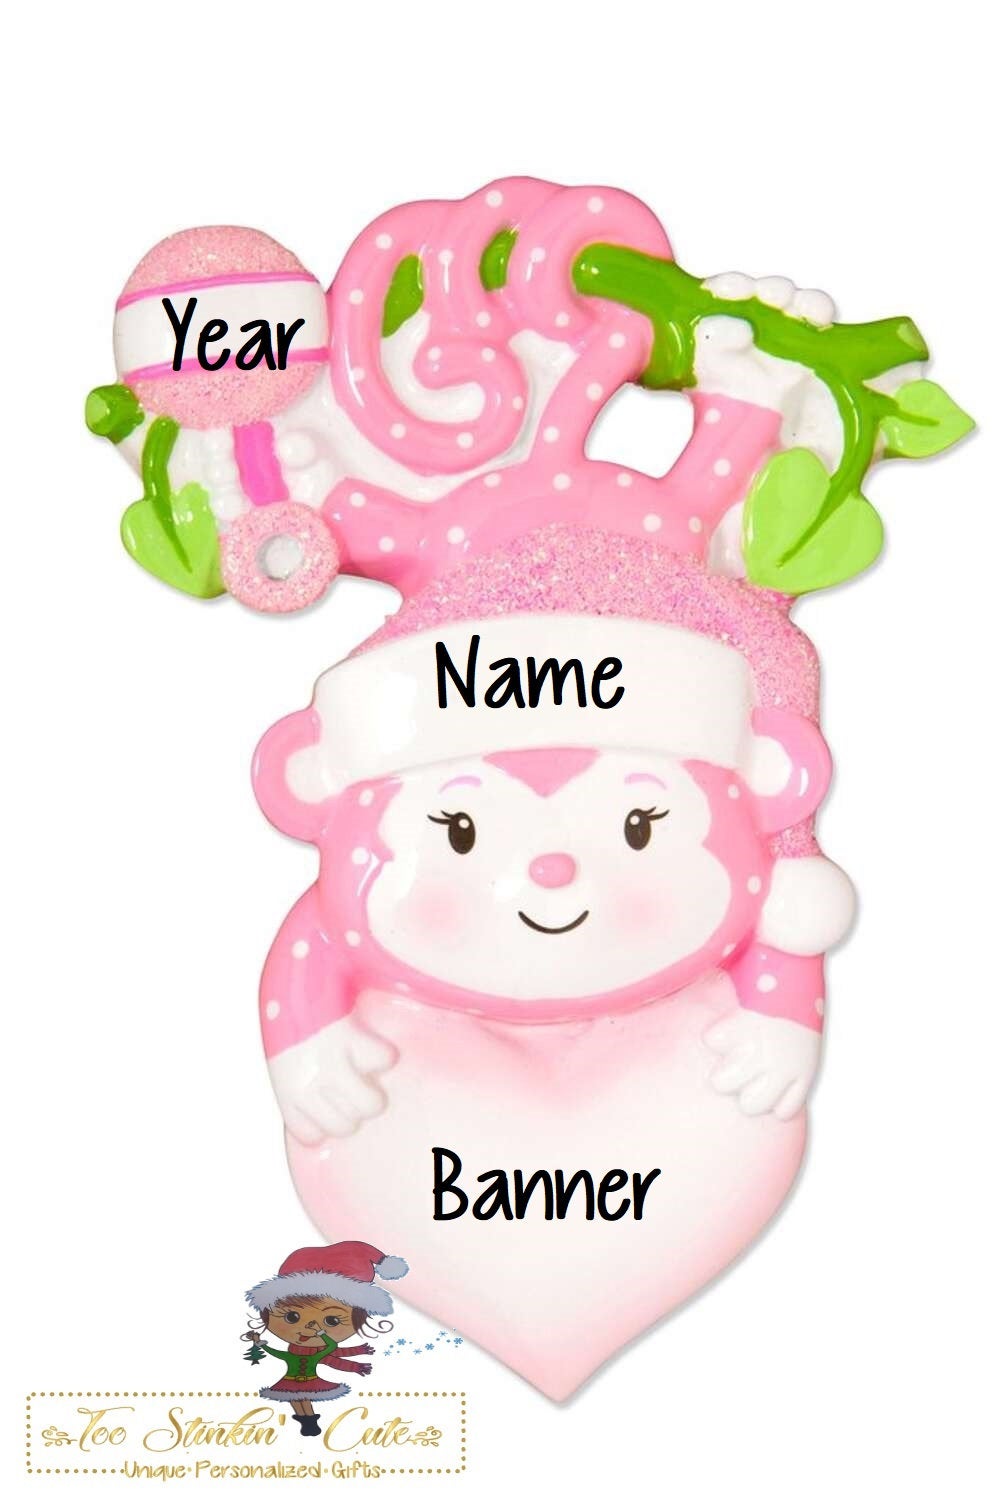 Christmas Ornament Baby Girl Monkey/ Baby's 1st Christmas/ Newborn/ New Baby - Personalized + Free Shipping!